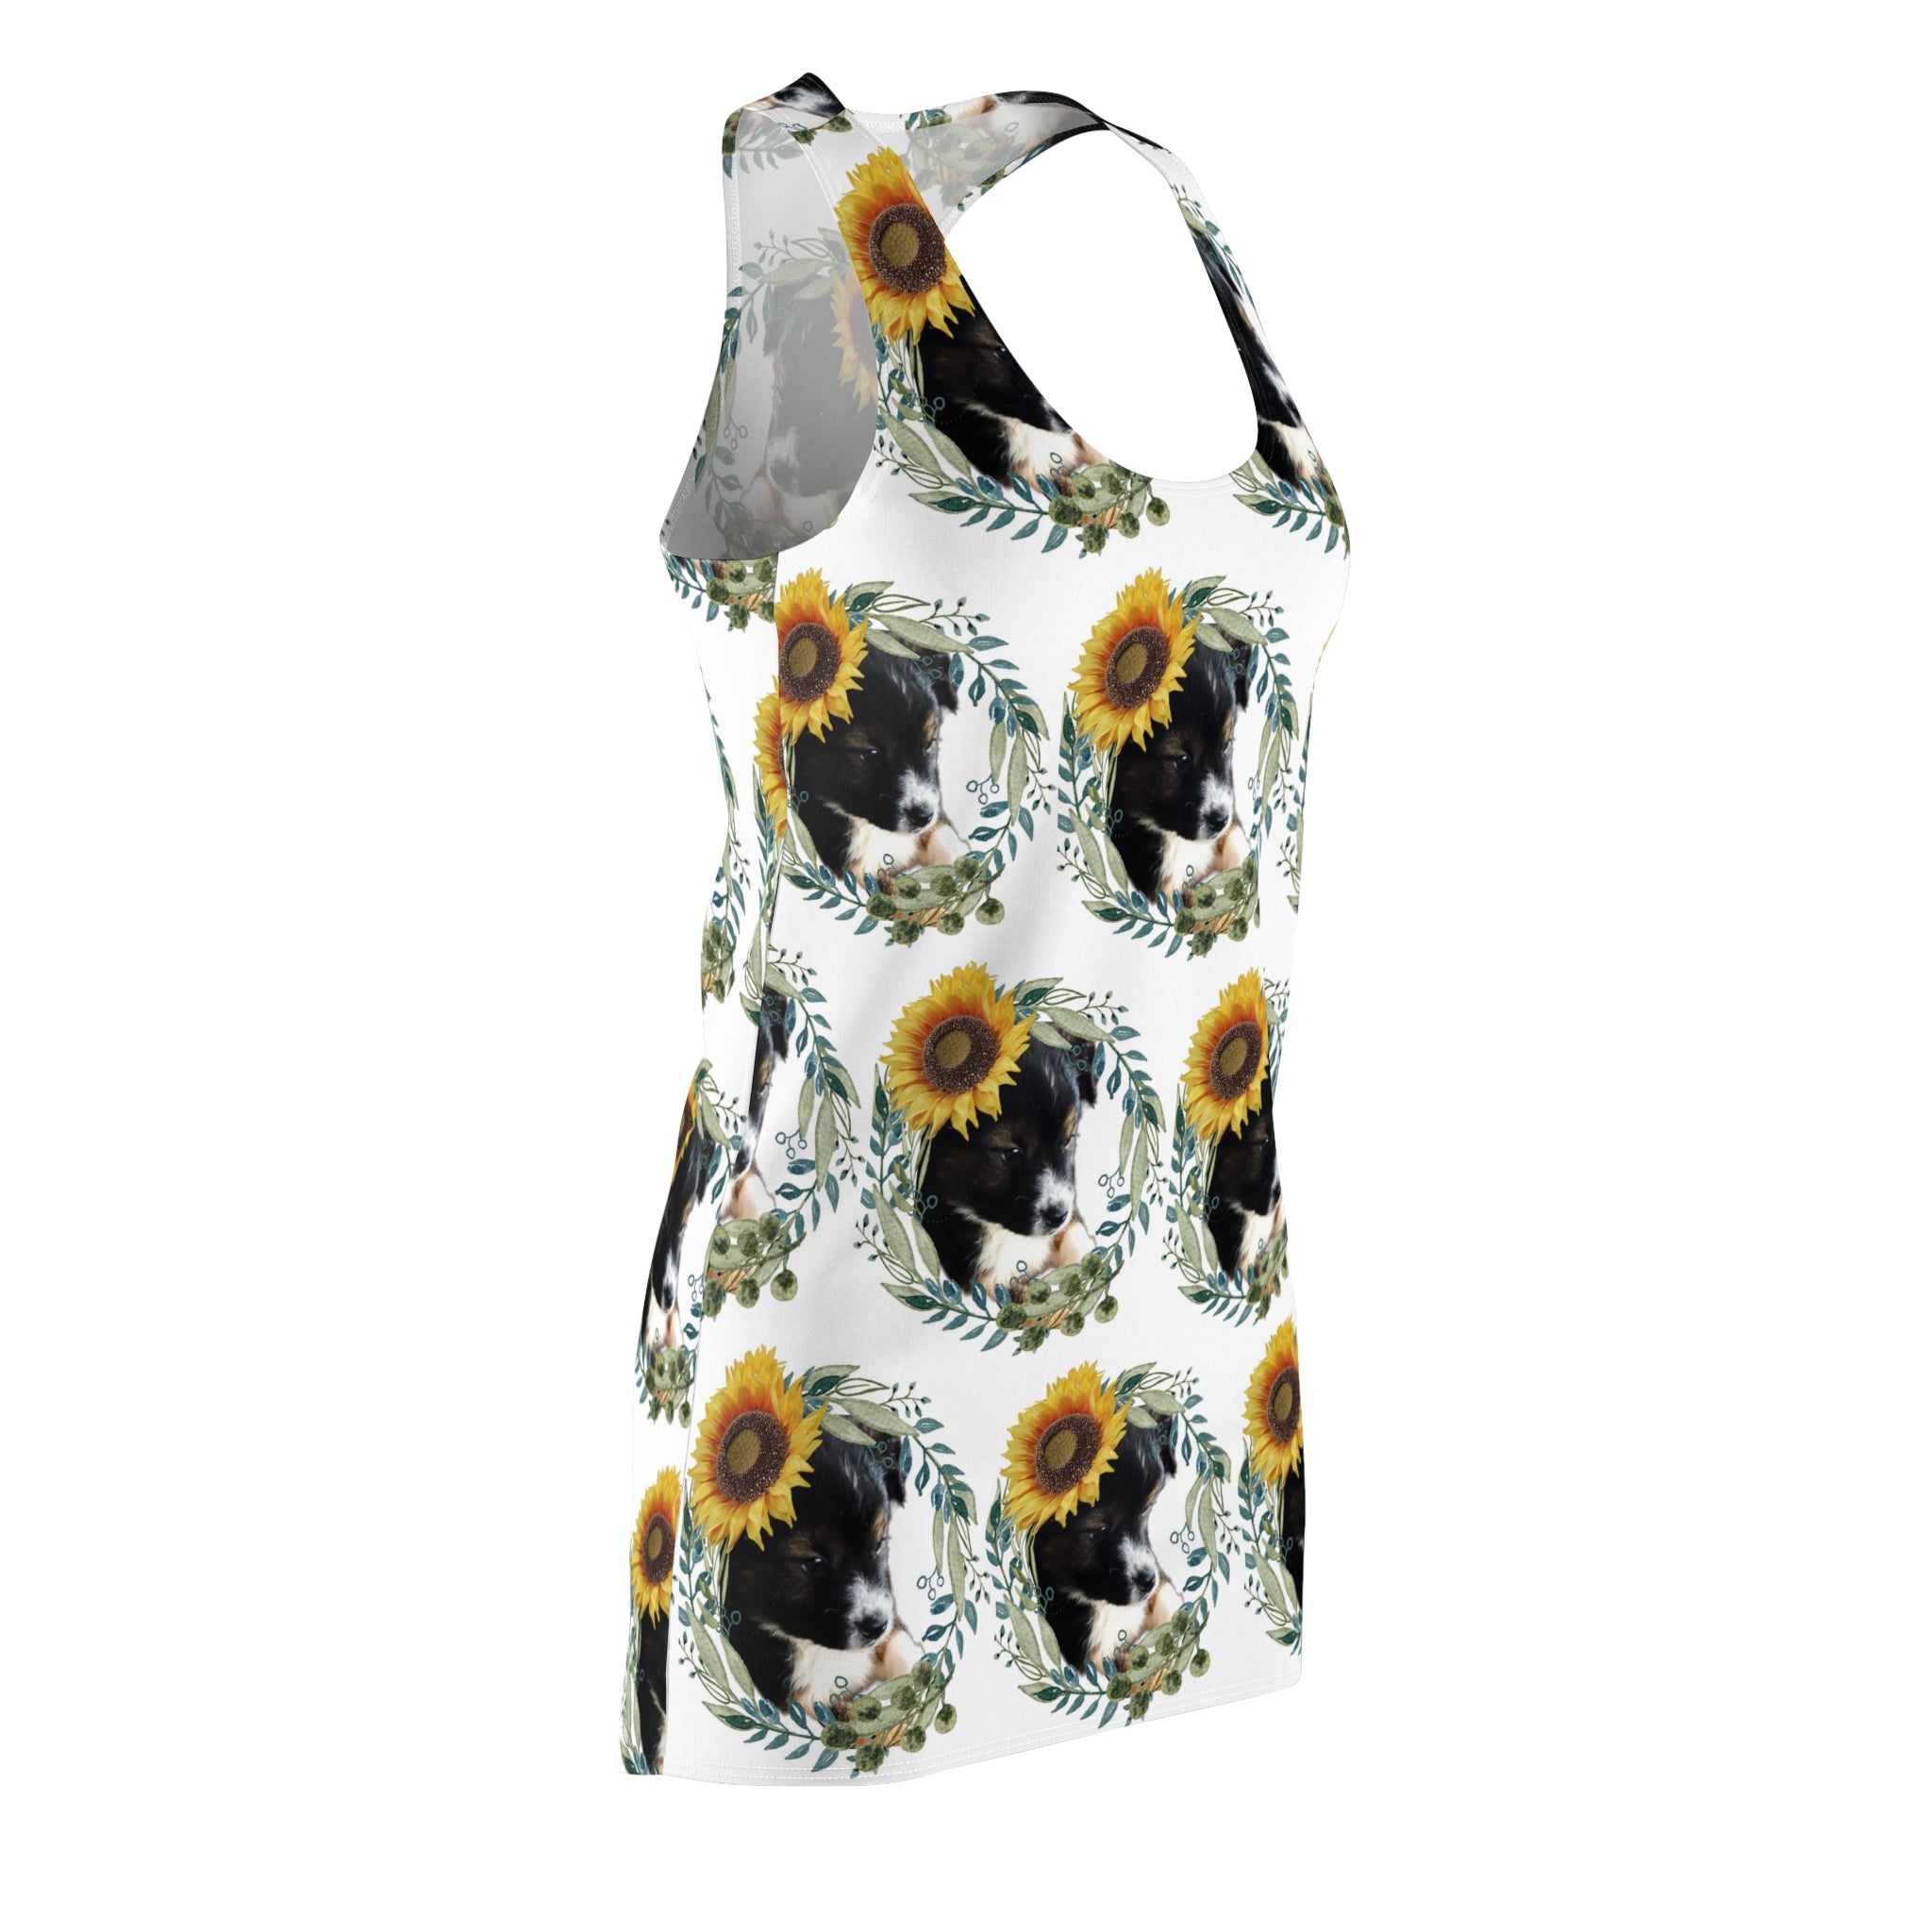 Cute Black Puppy with Sunflowers Printed Racerback Dress - Shell Design Boutique